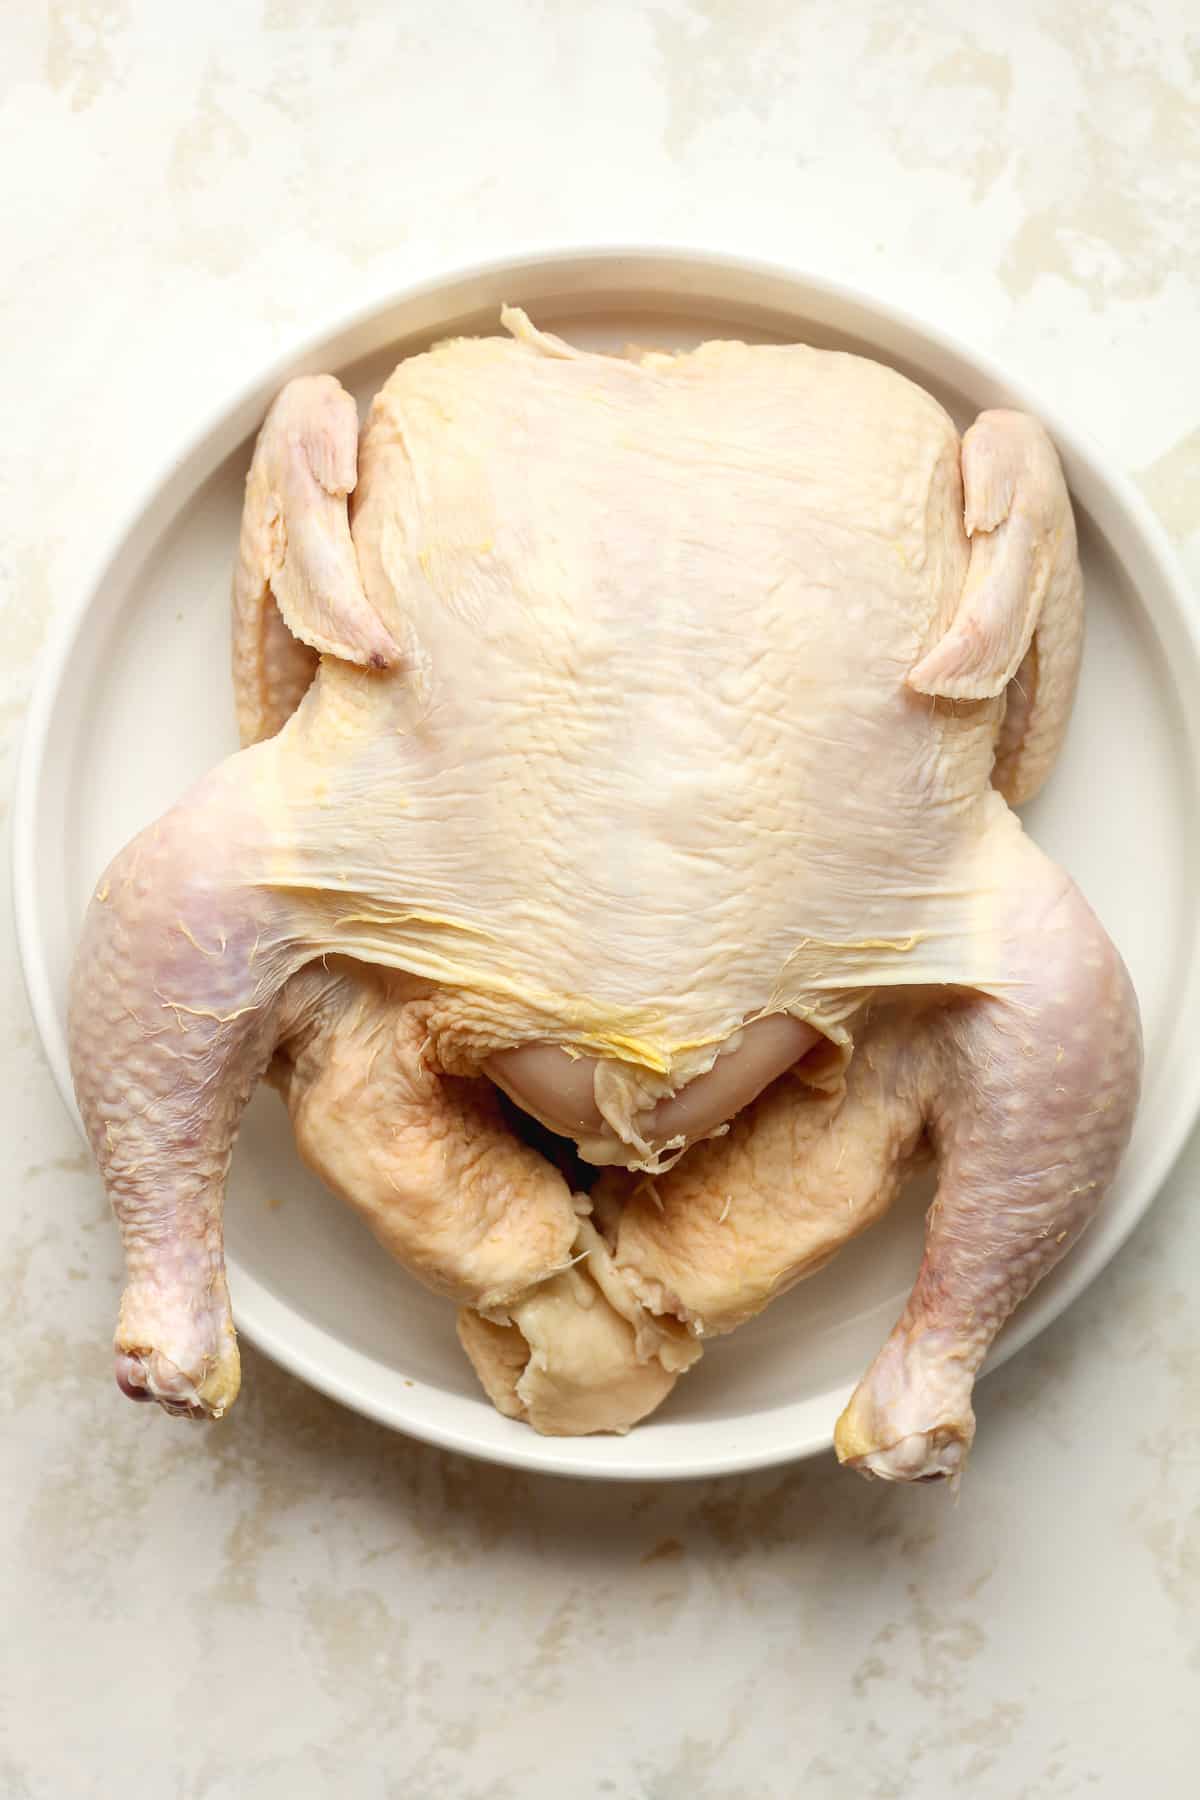 A raw chicken in a white tray.